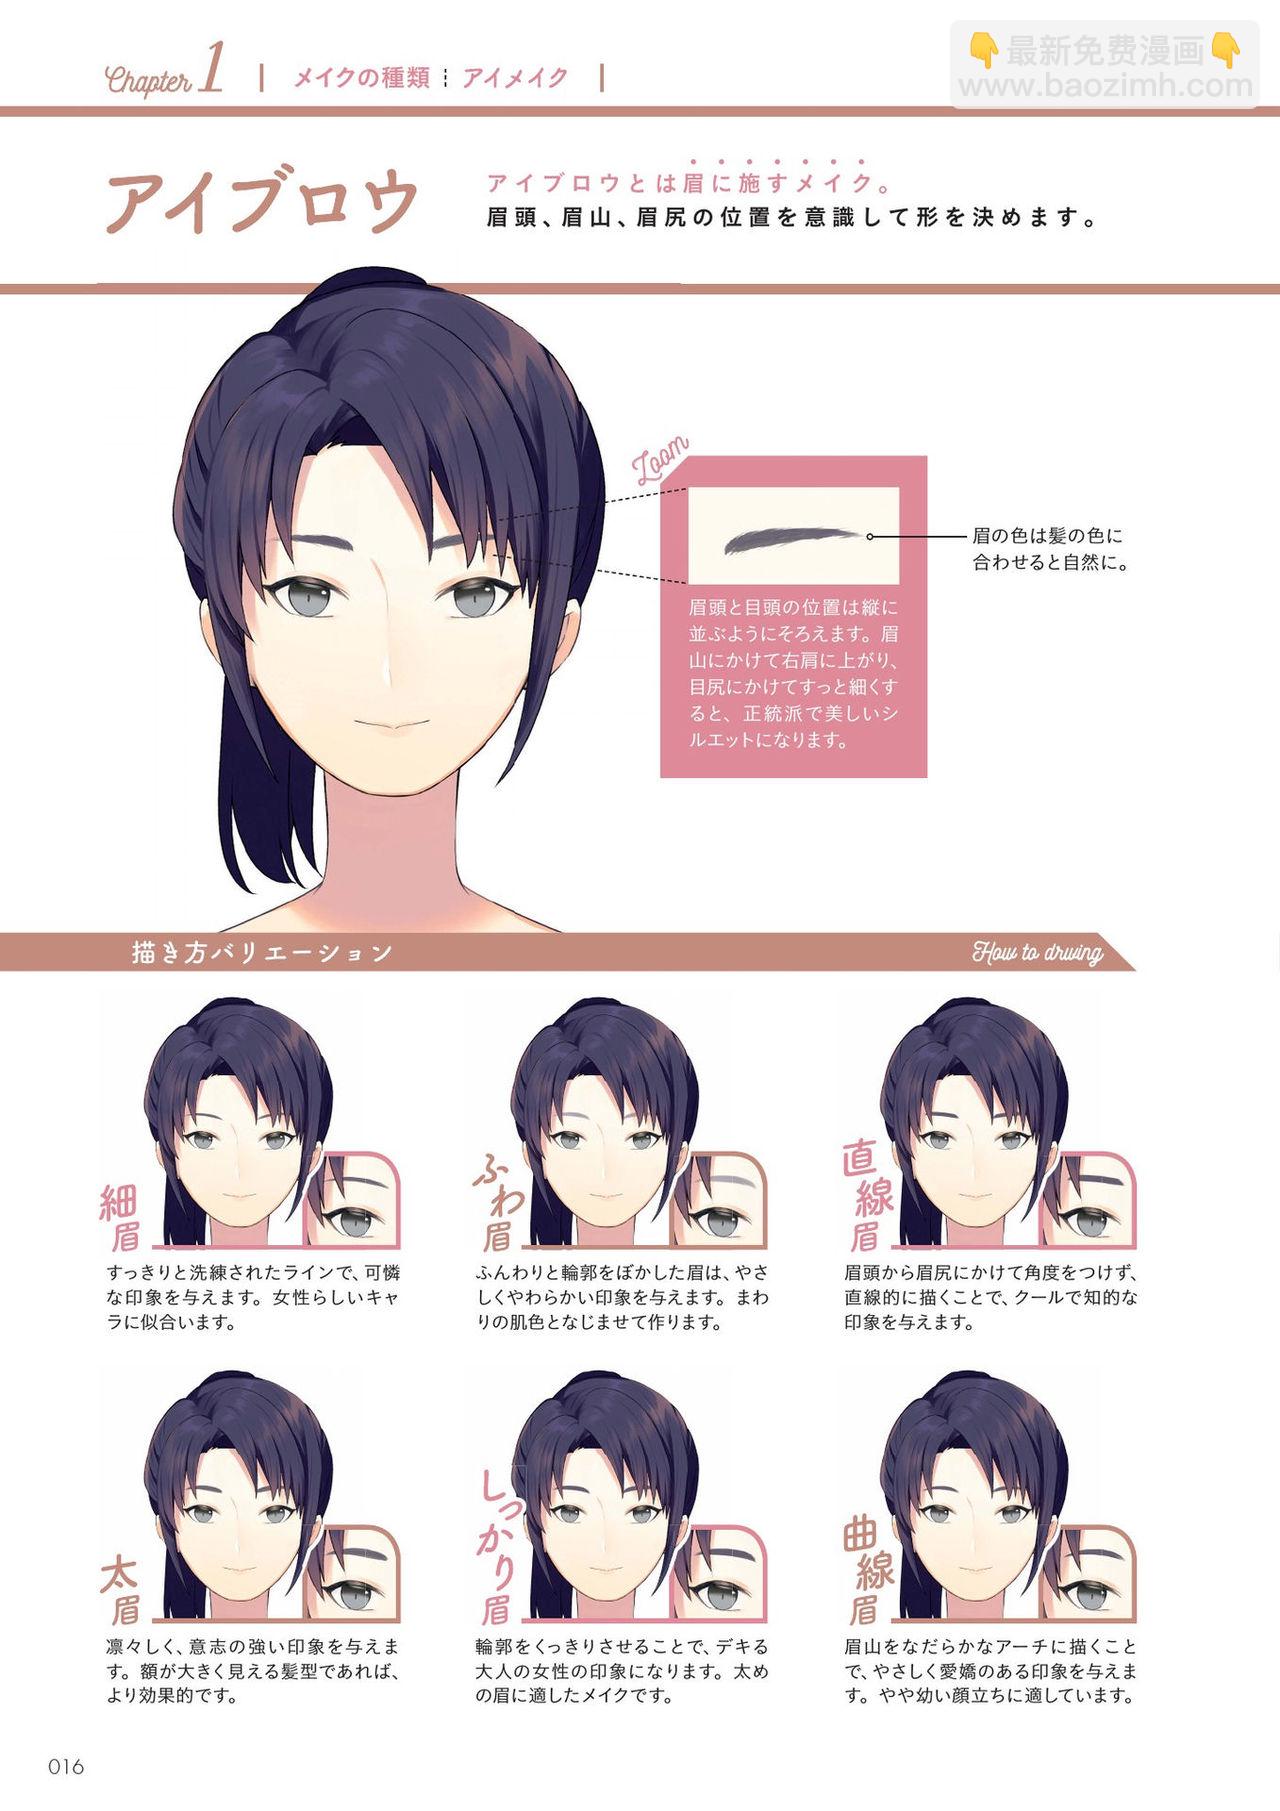 [sogawa]Super drawable series Techniques for drawing female characters with makeup  - 1話(1/4) - 2